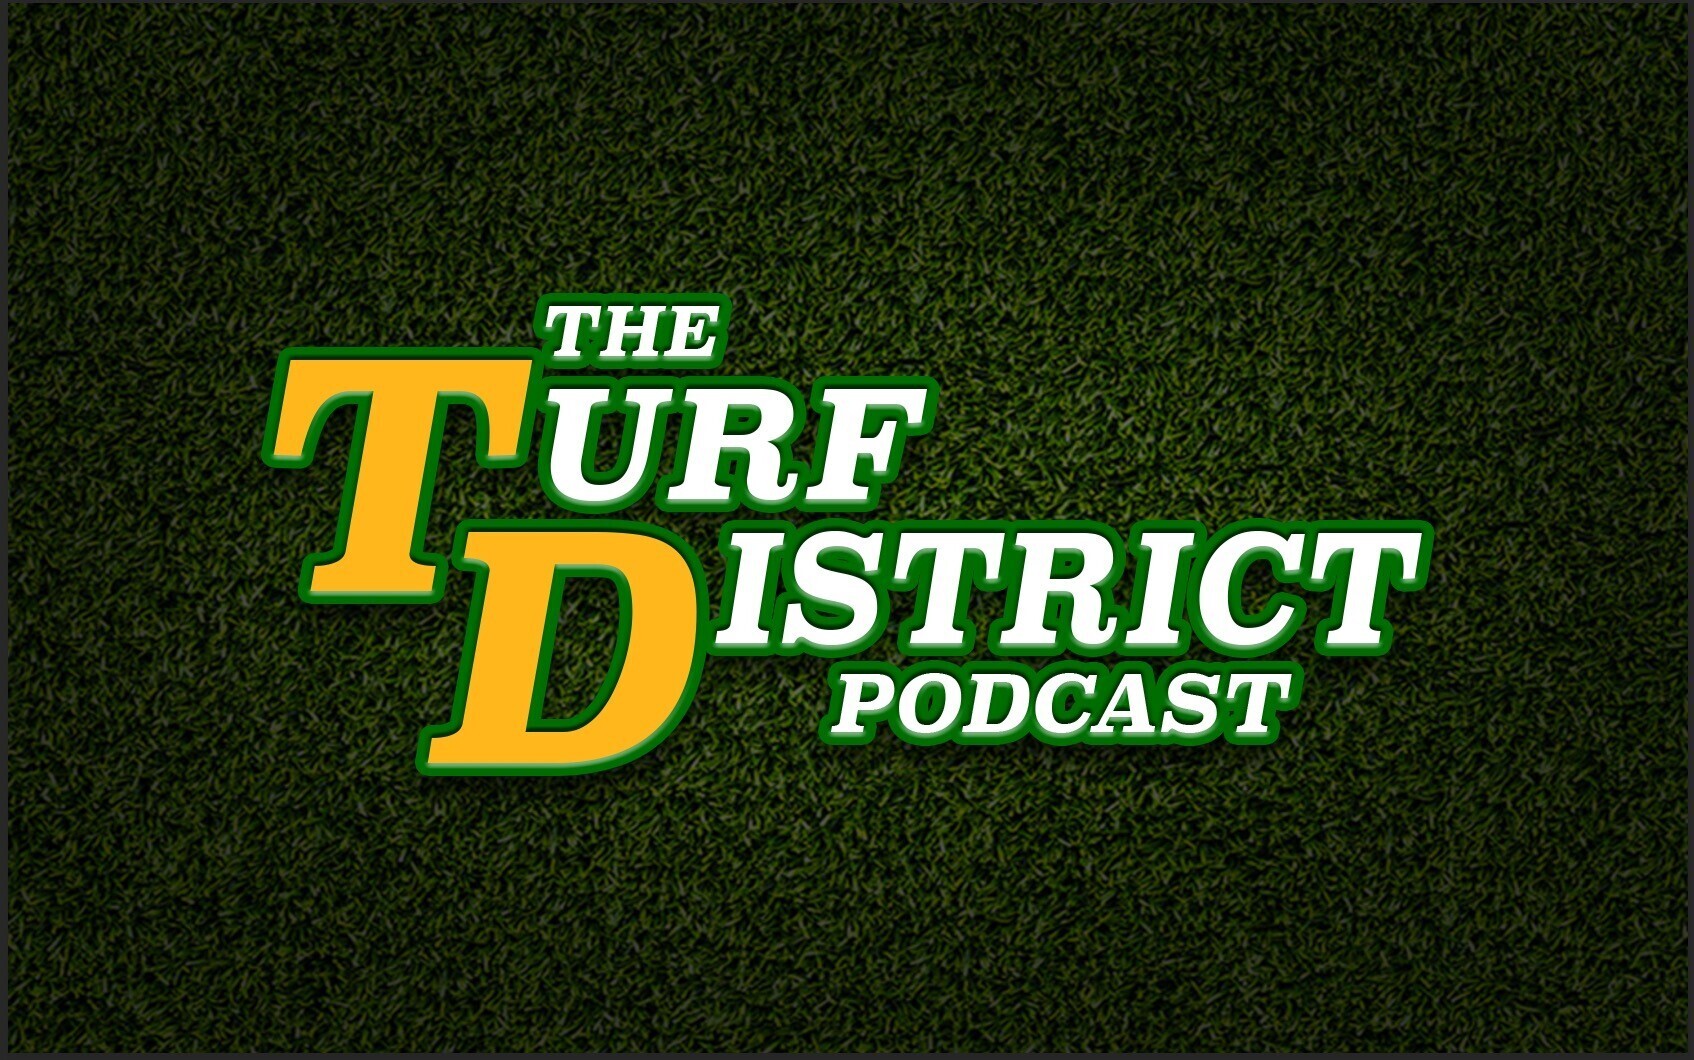 The Turf District